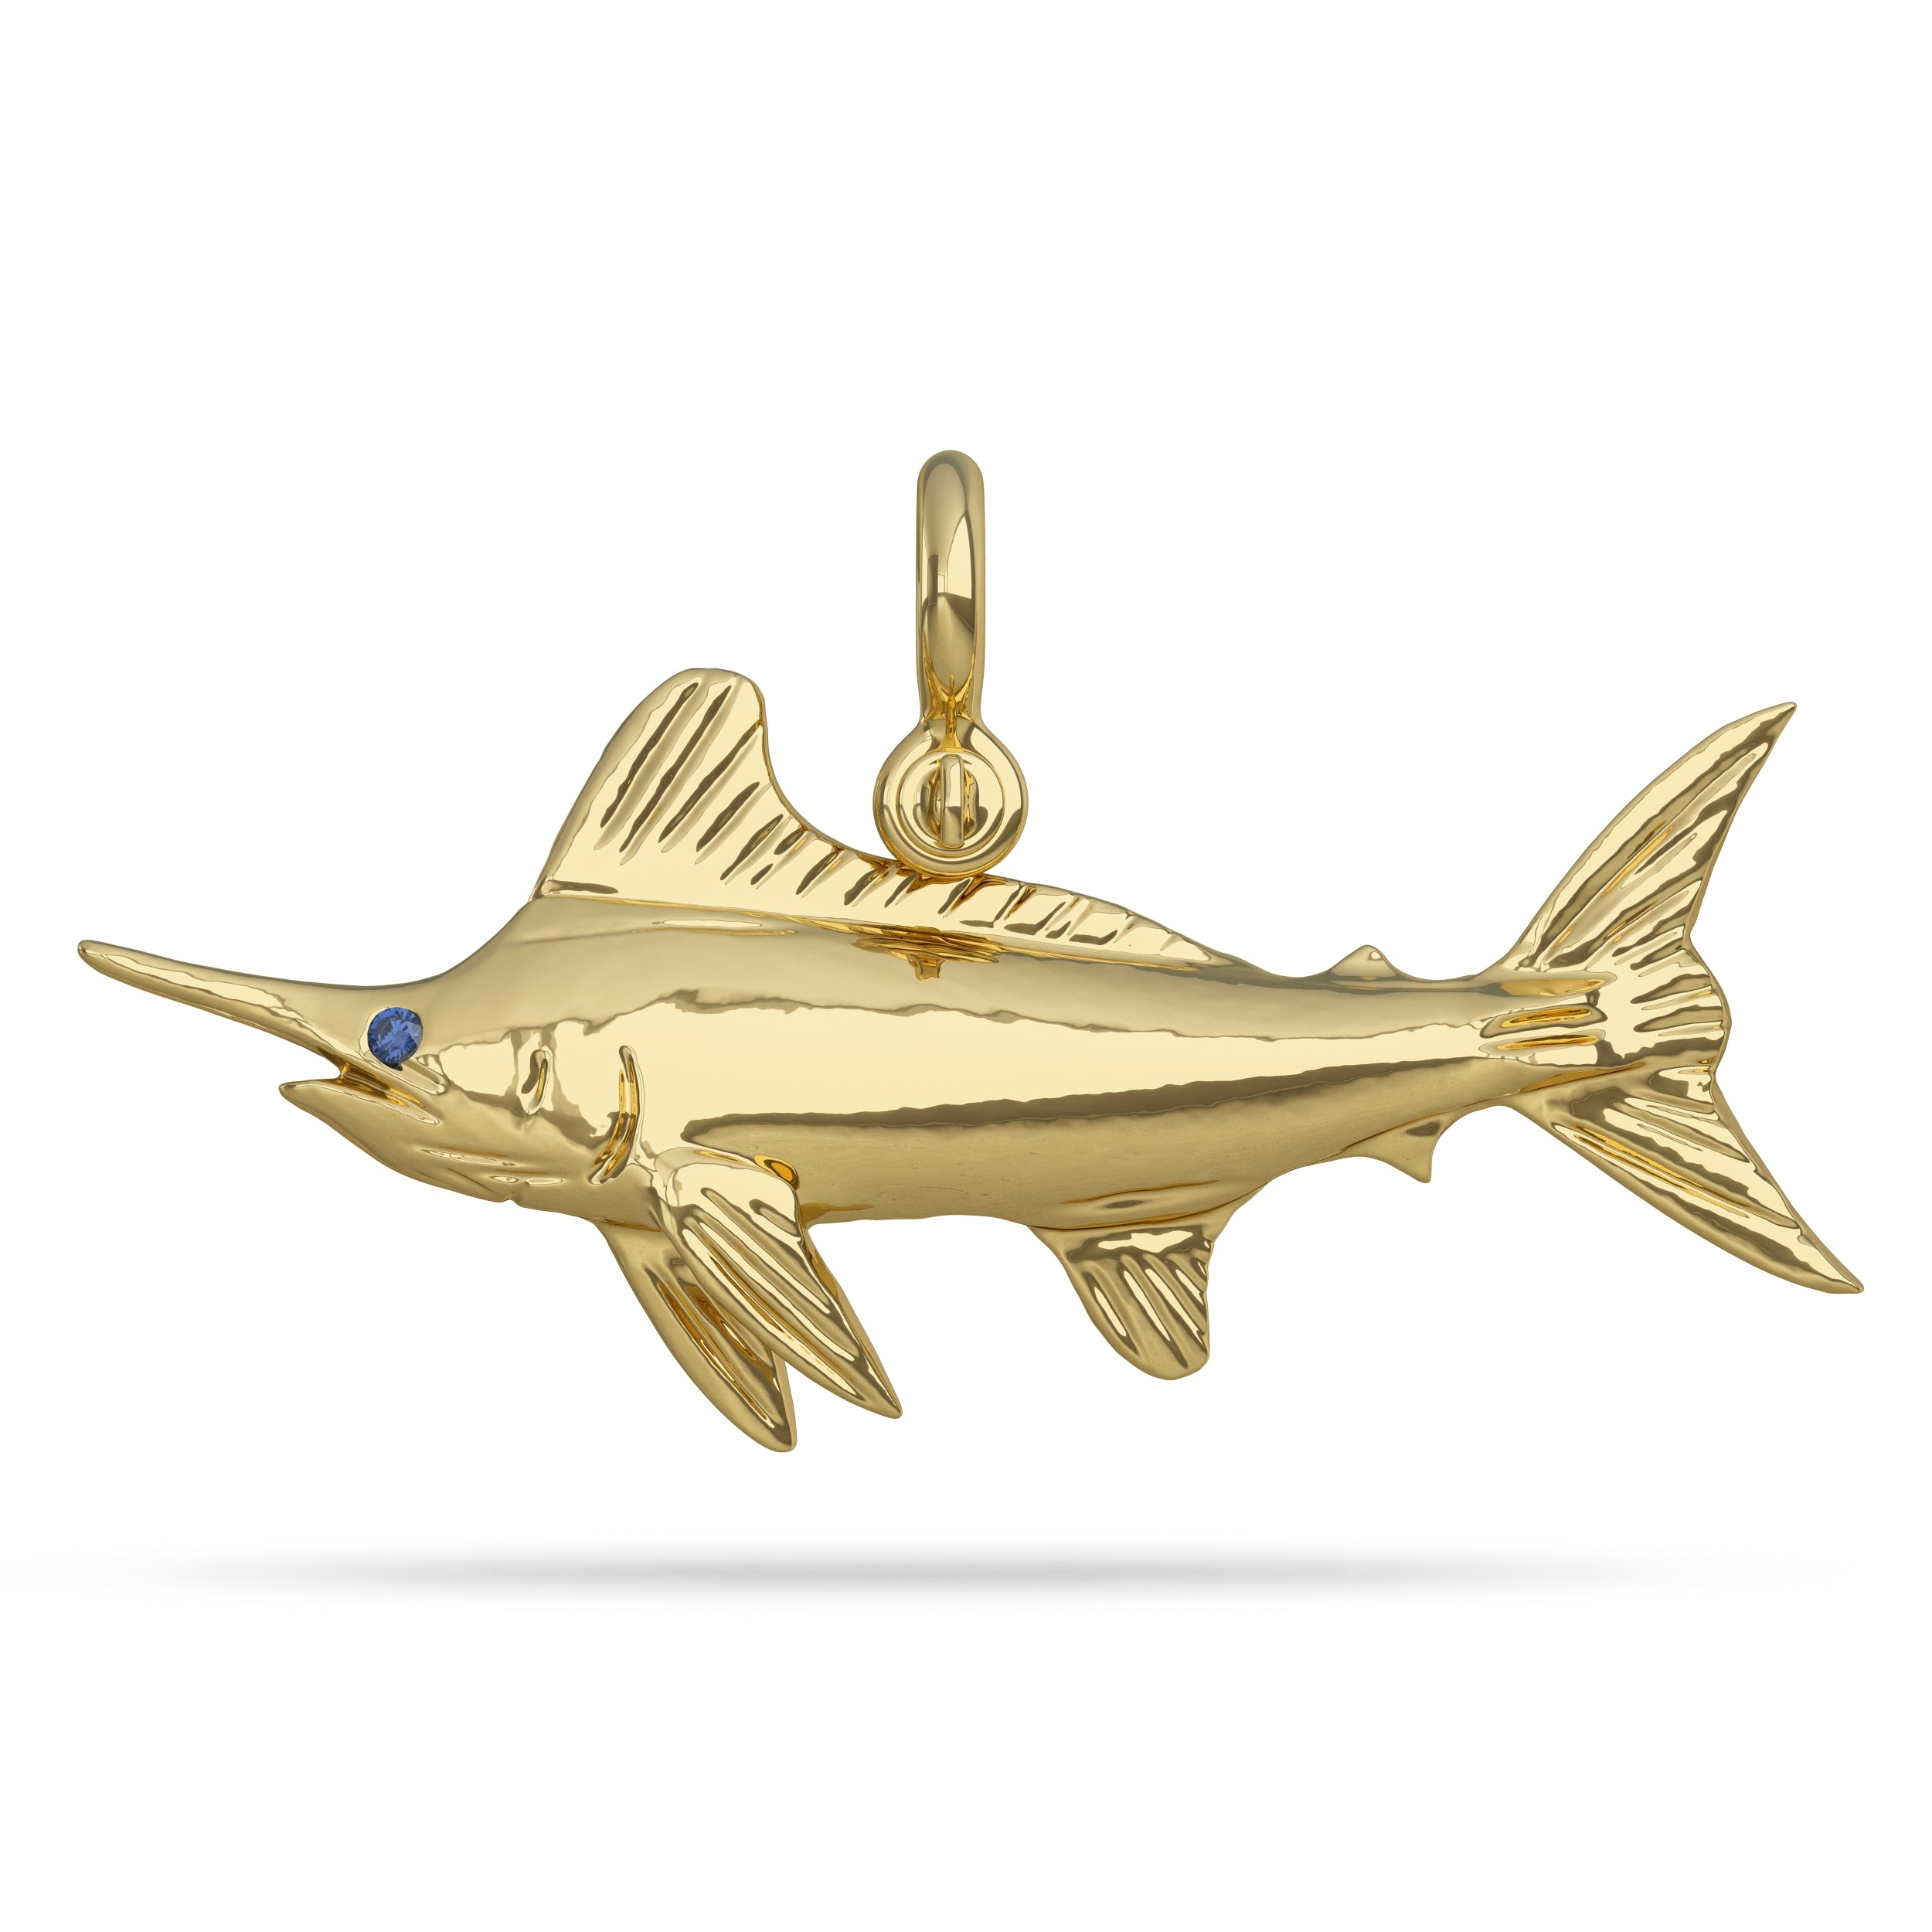 Solid 14k Gold White Marlin Pendant High Polished Mirror Finish With Blue Sapphire Eye with A Mariner Shackle Bail Custom Designed By Nautical Treasure Jewelry In The Florida Keys Open